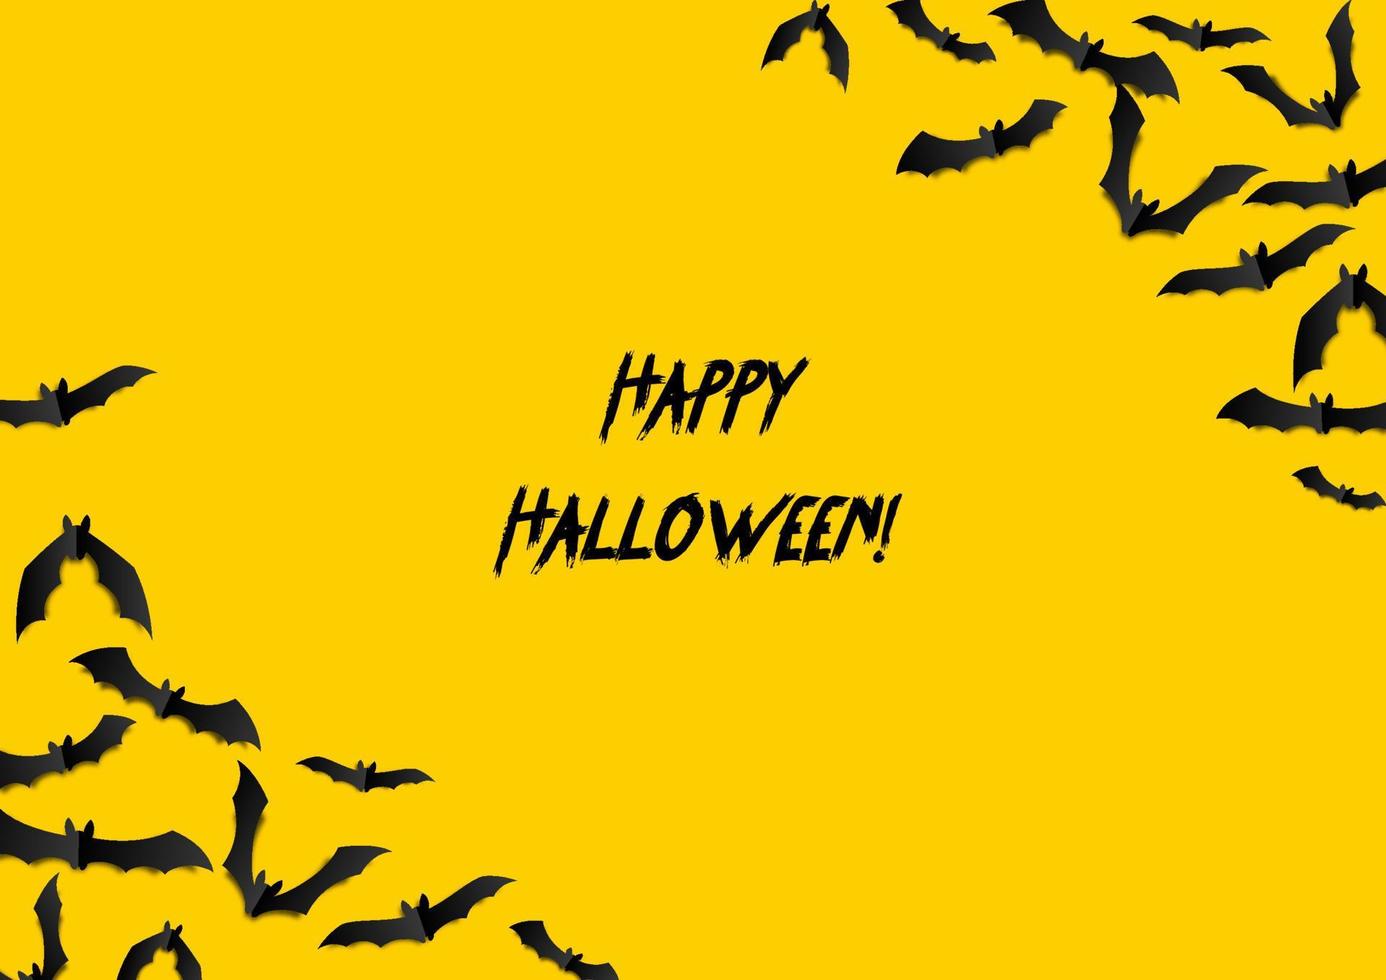 Halloween greeting card with black bats on yellow background vector